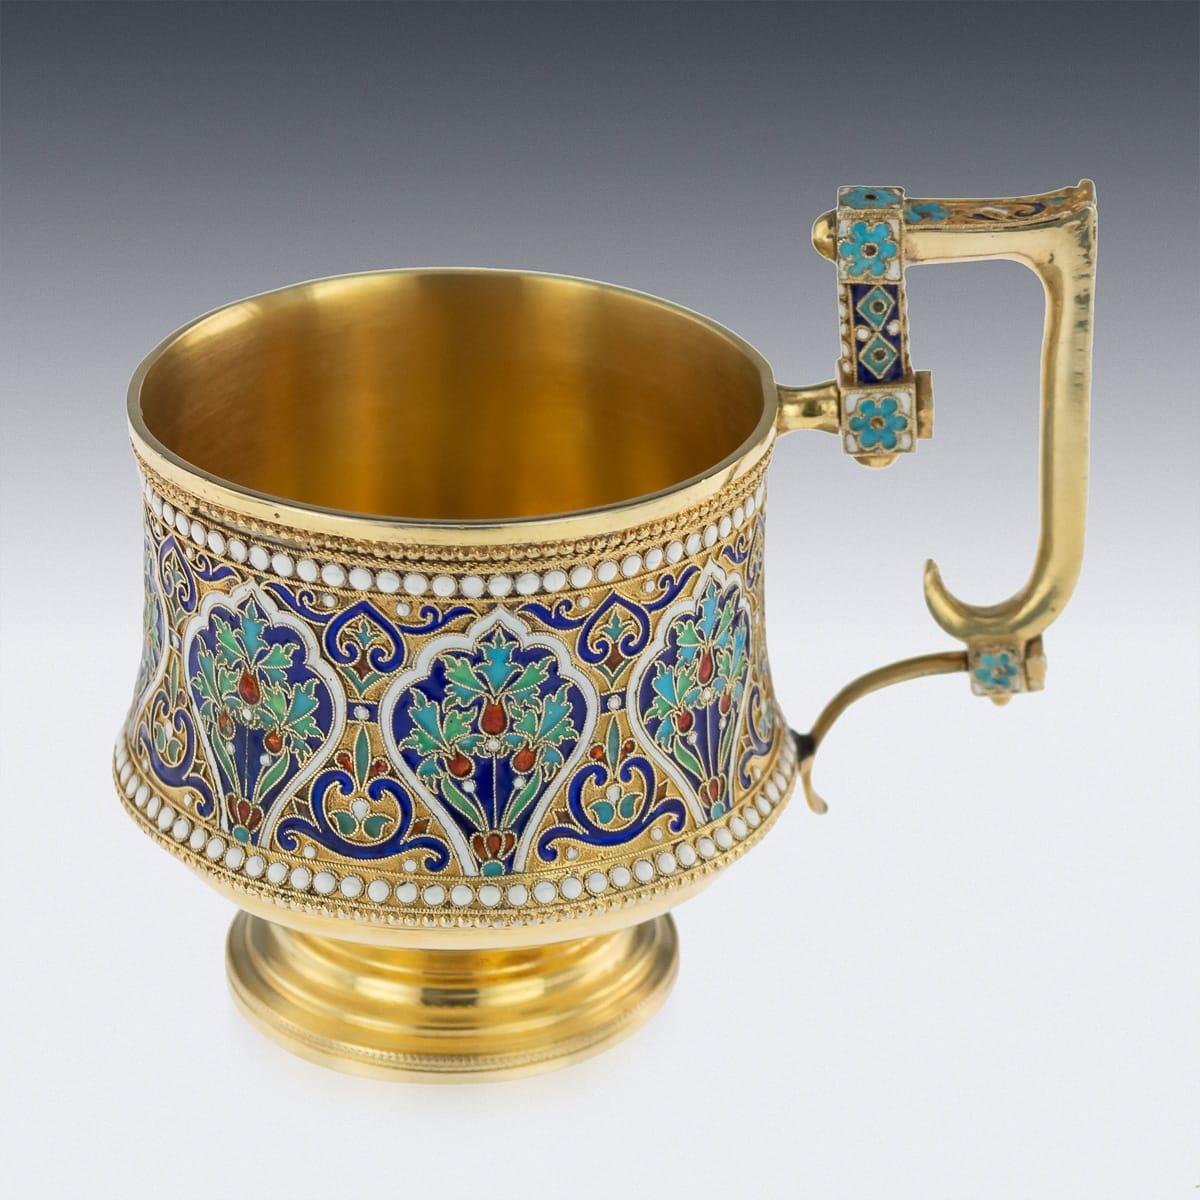 19th Century Imperial Russian Solid Silver-Gilt and Enamel Cup on Saucer 1